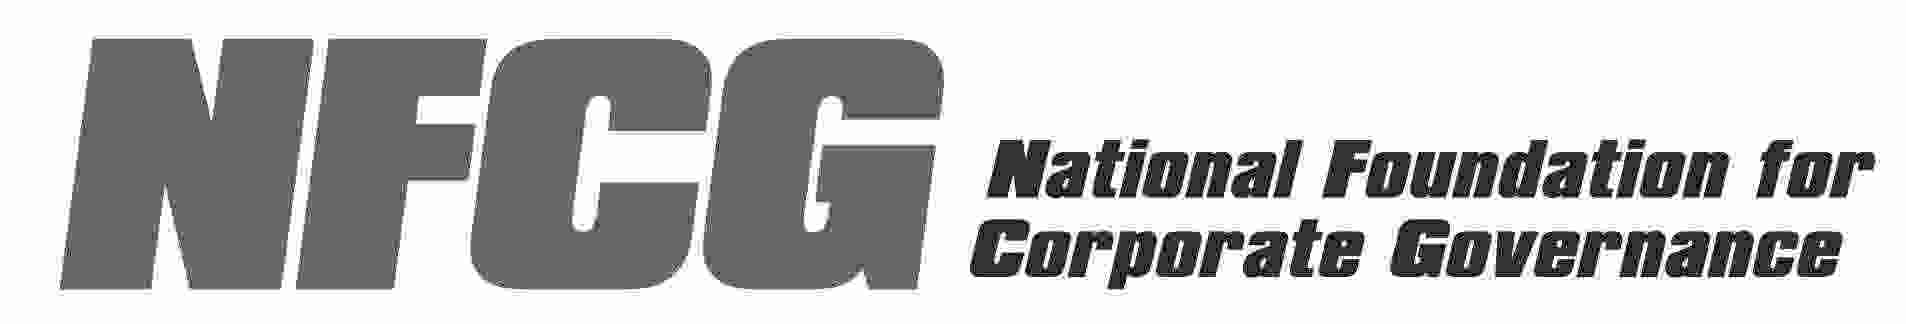 National Foundation for Corporate Governance